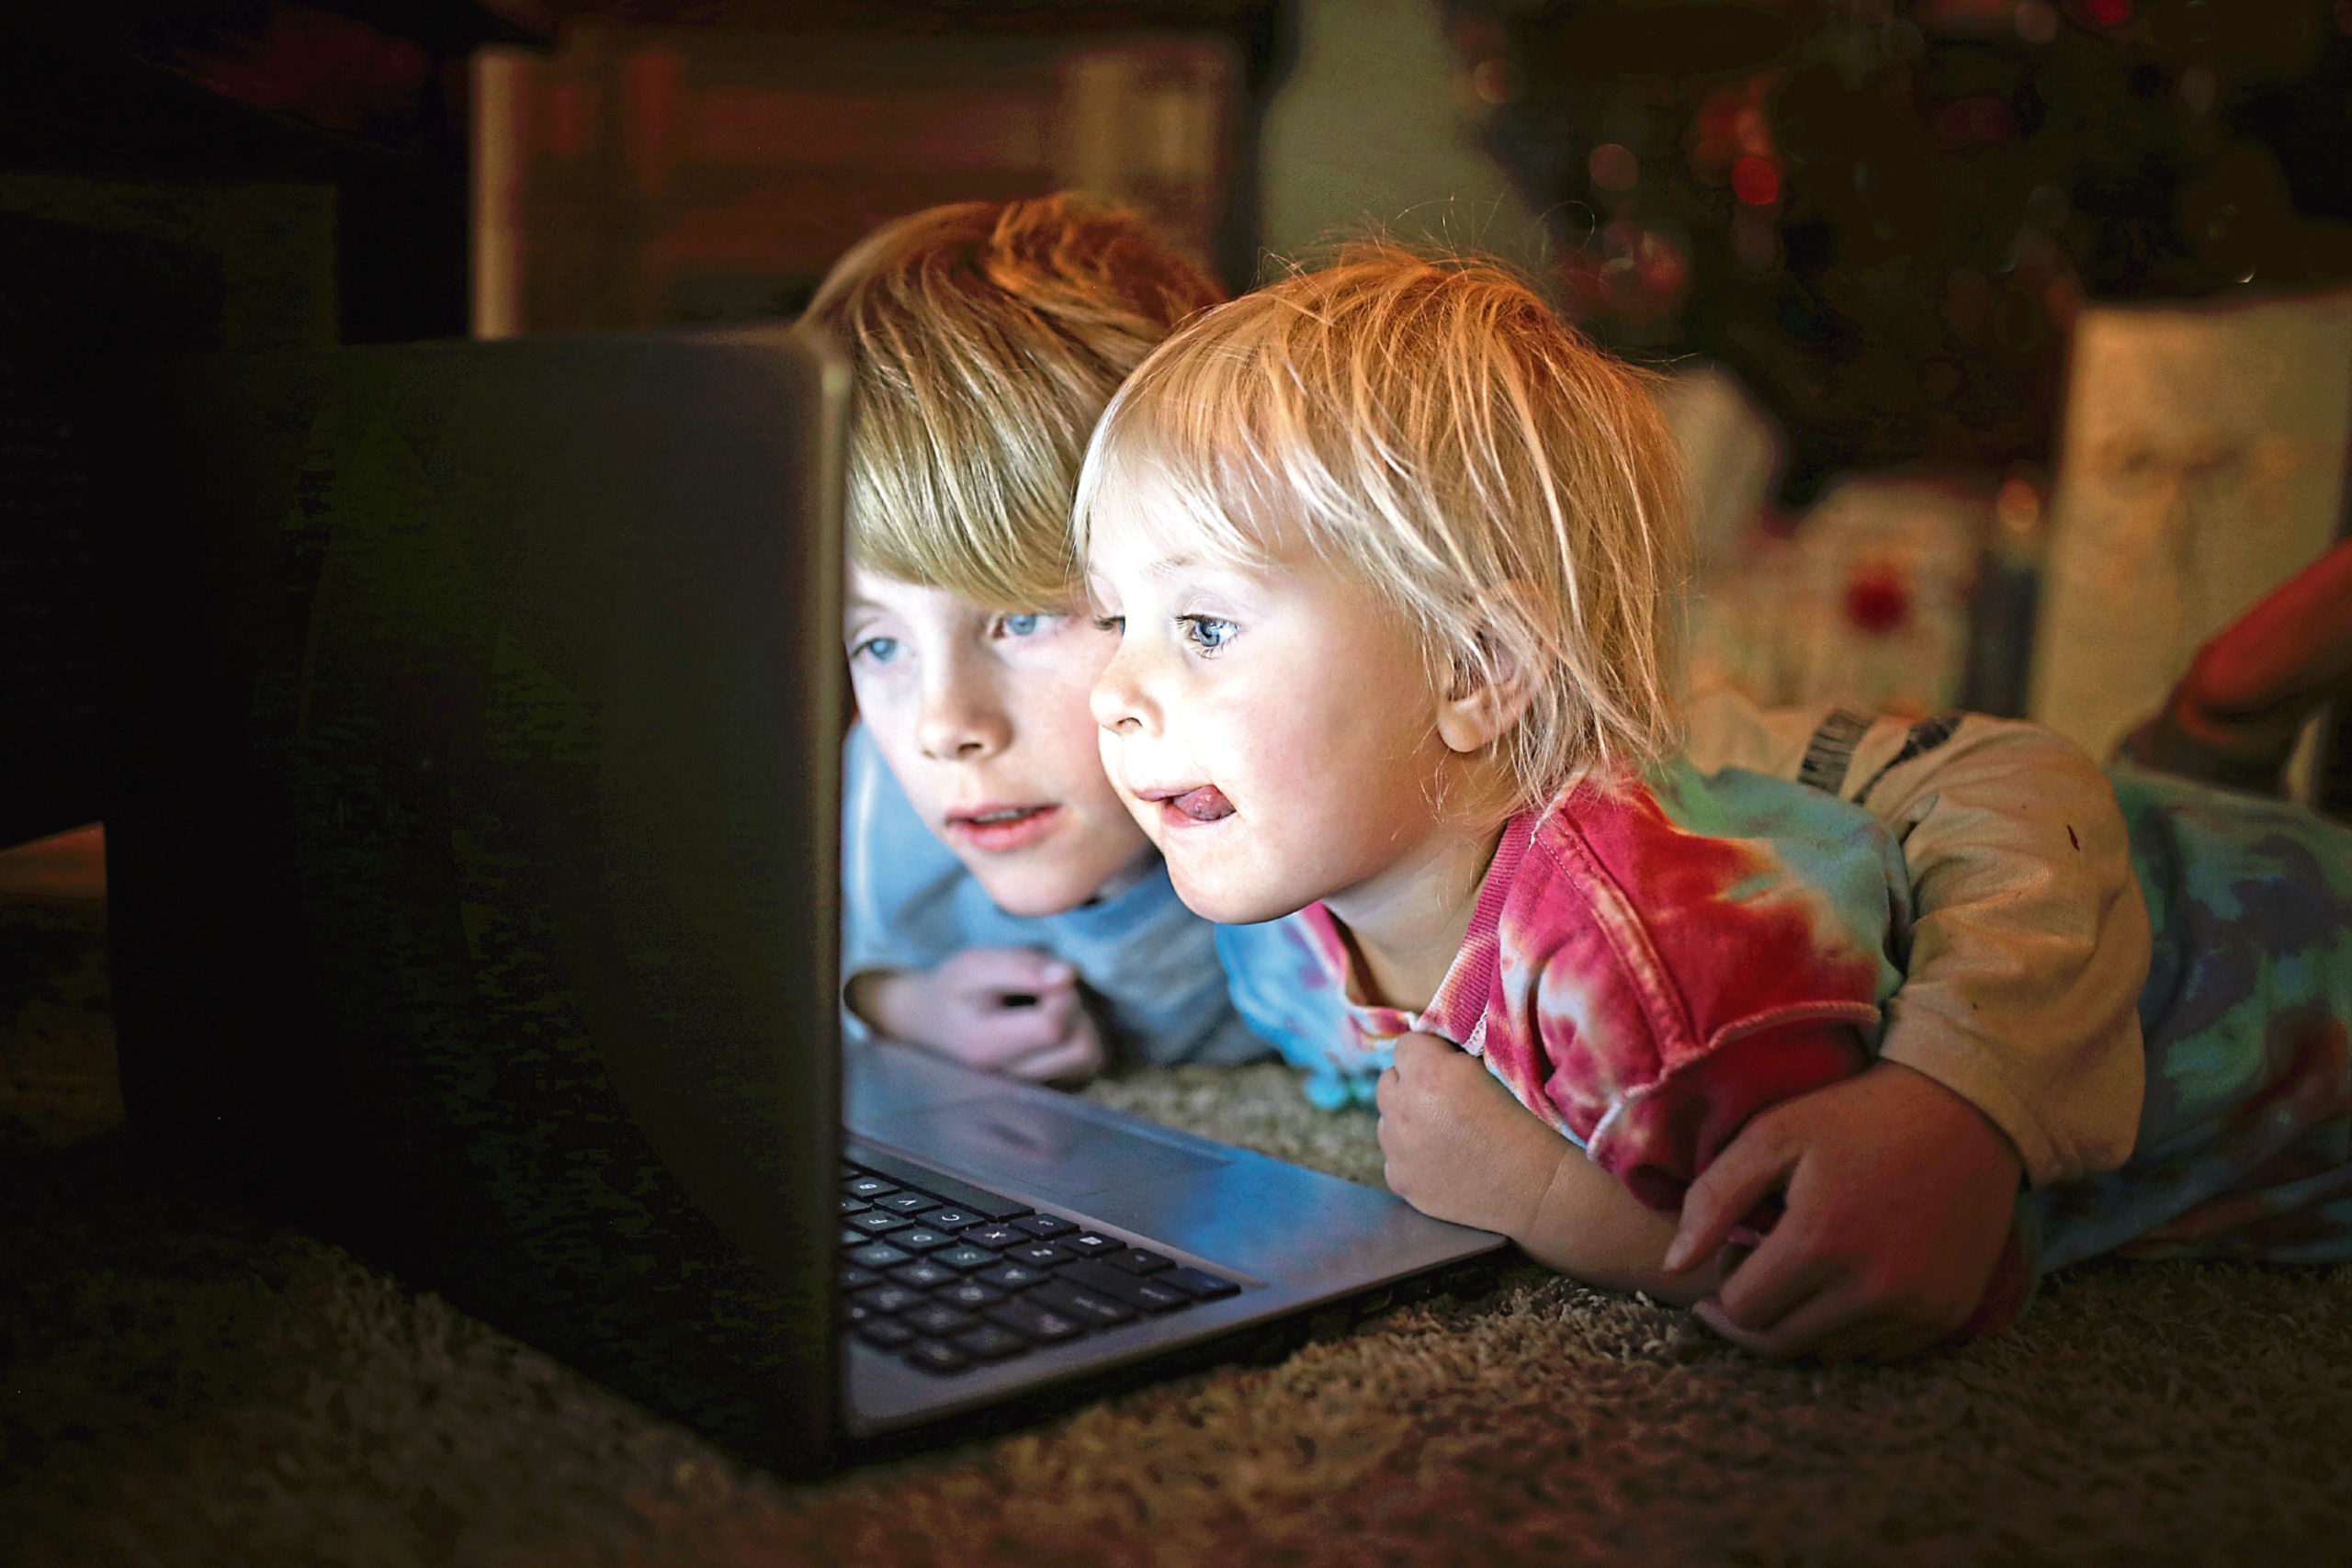 Children can learn when using a laptop, but their screen time should be monitored closely